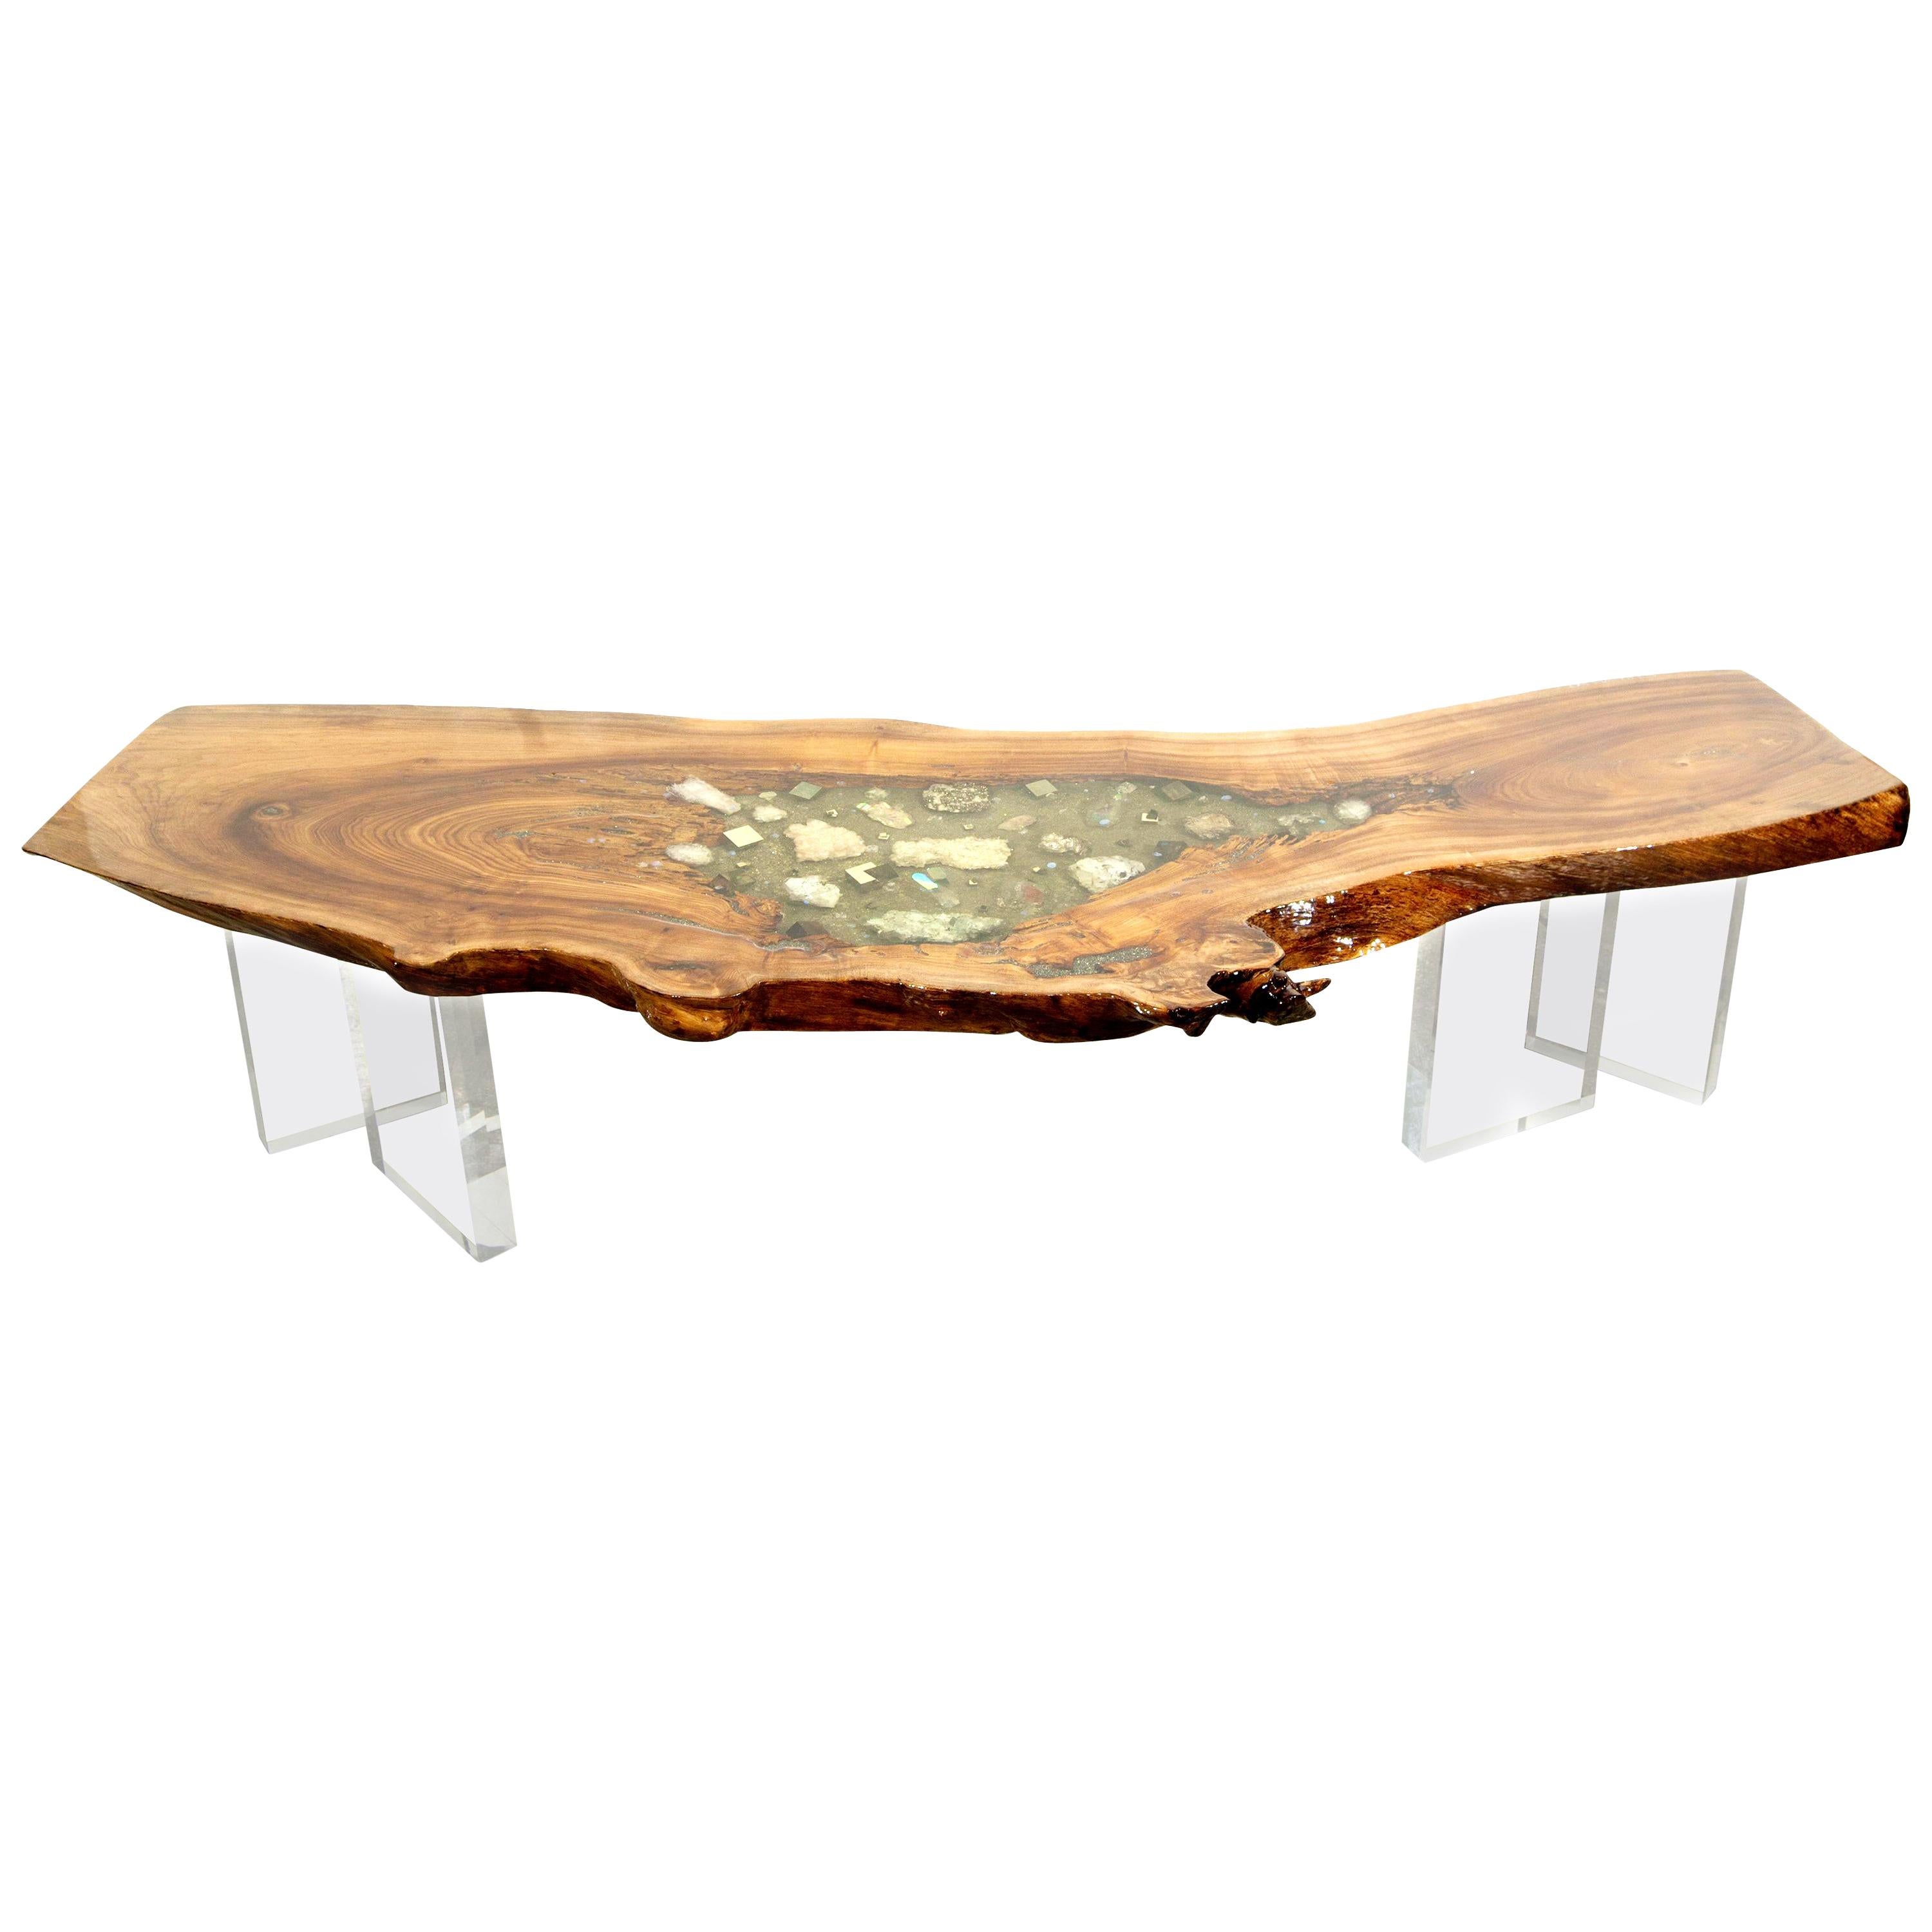 English Elm Wood Coffee Table Quartz, Pyrite Inlays Lucite Base by Danna Weiss 